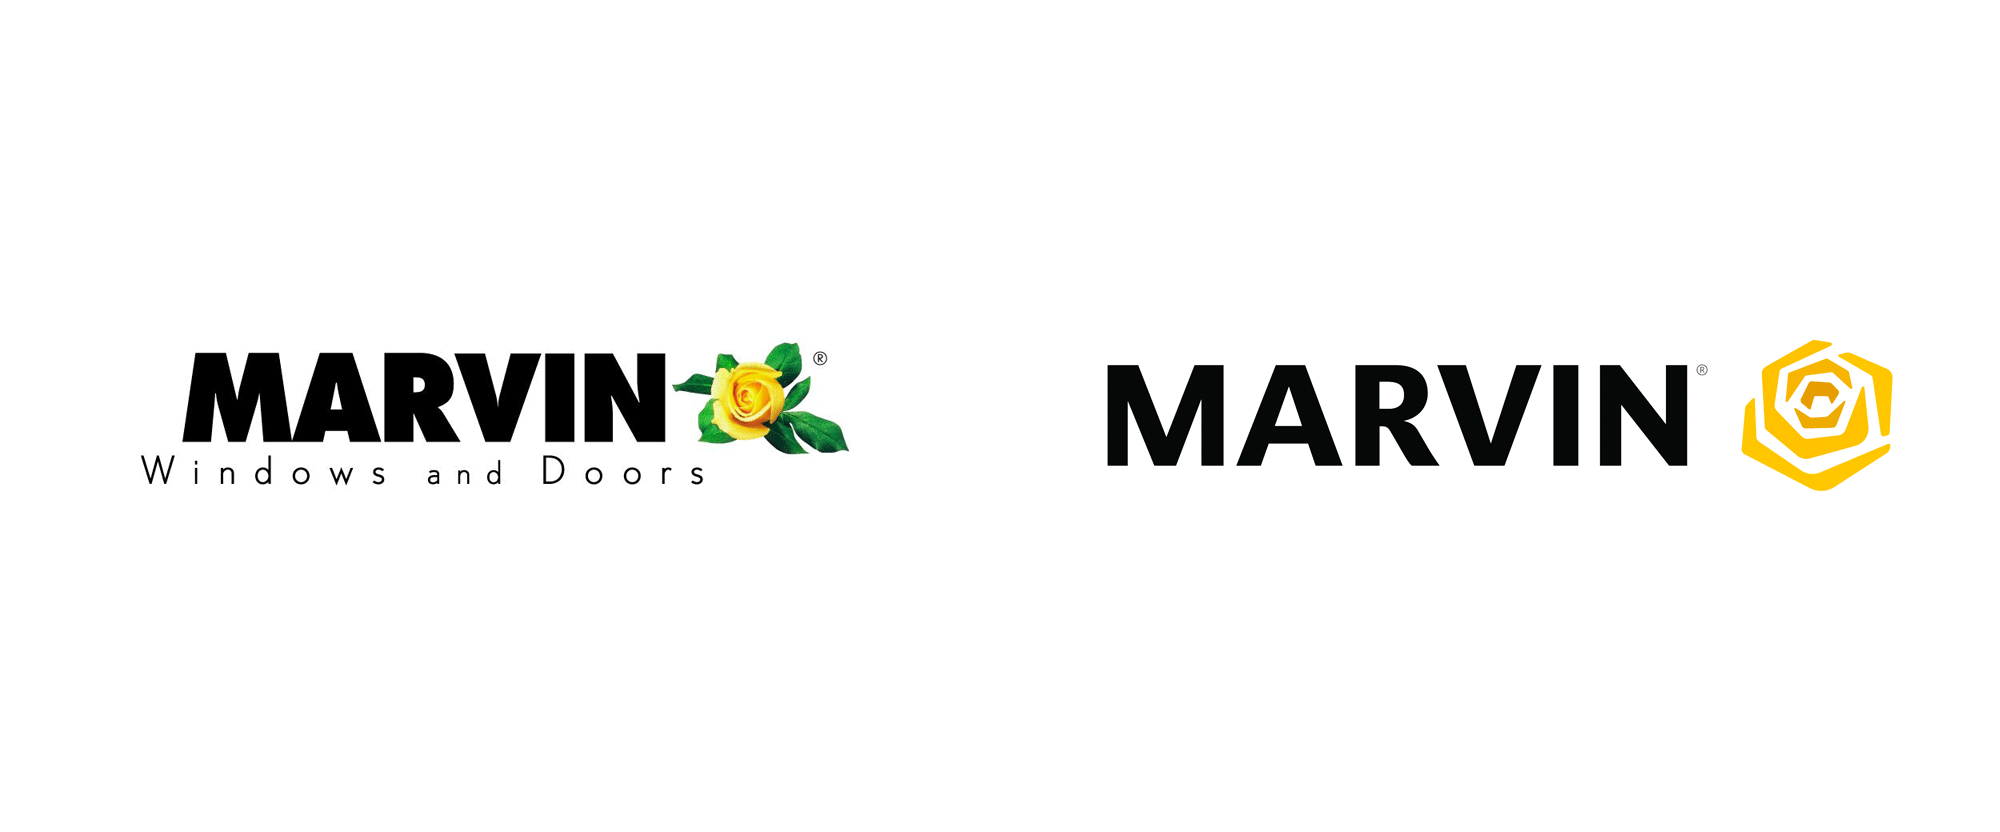 Marvin Logo - Brand New: New Logo for Marvin by VSA Partners